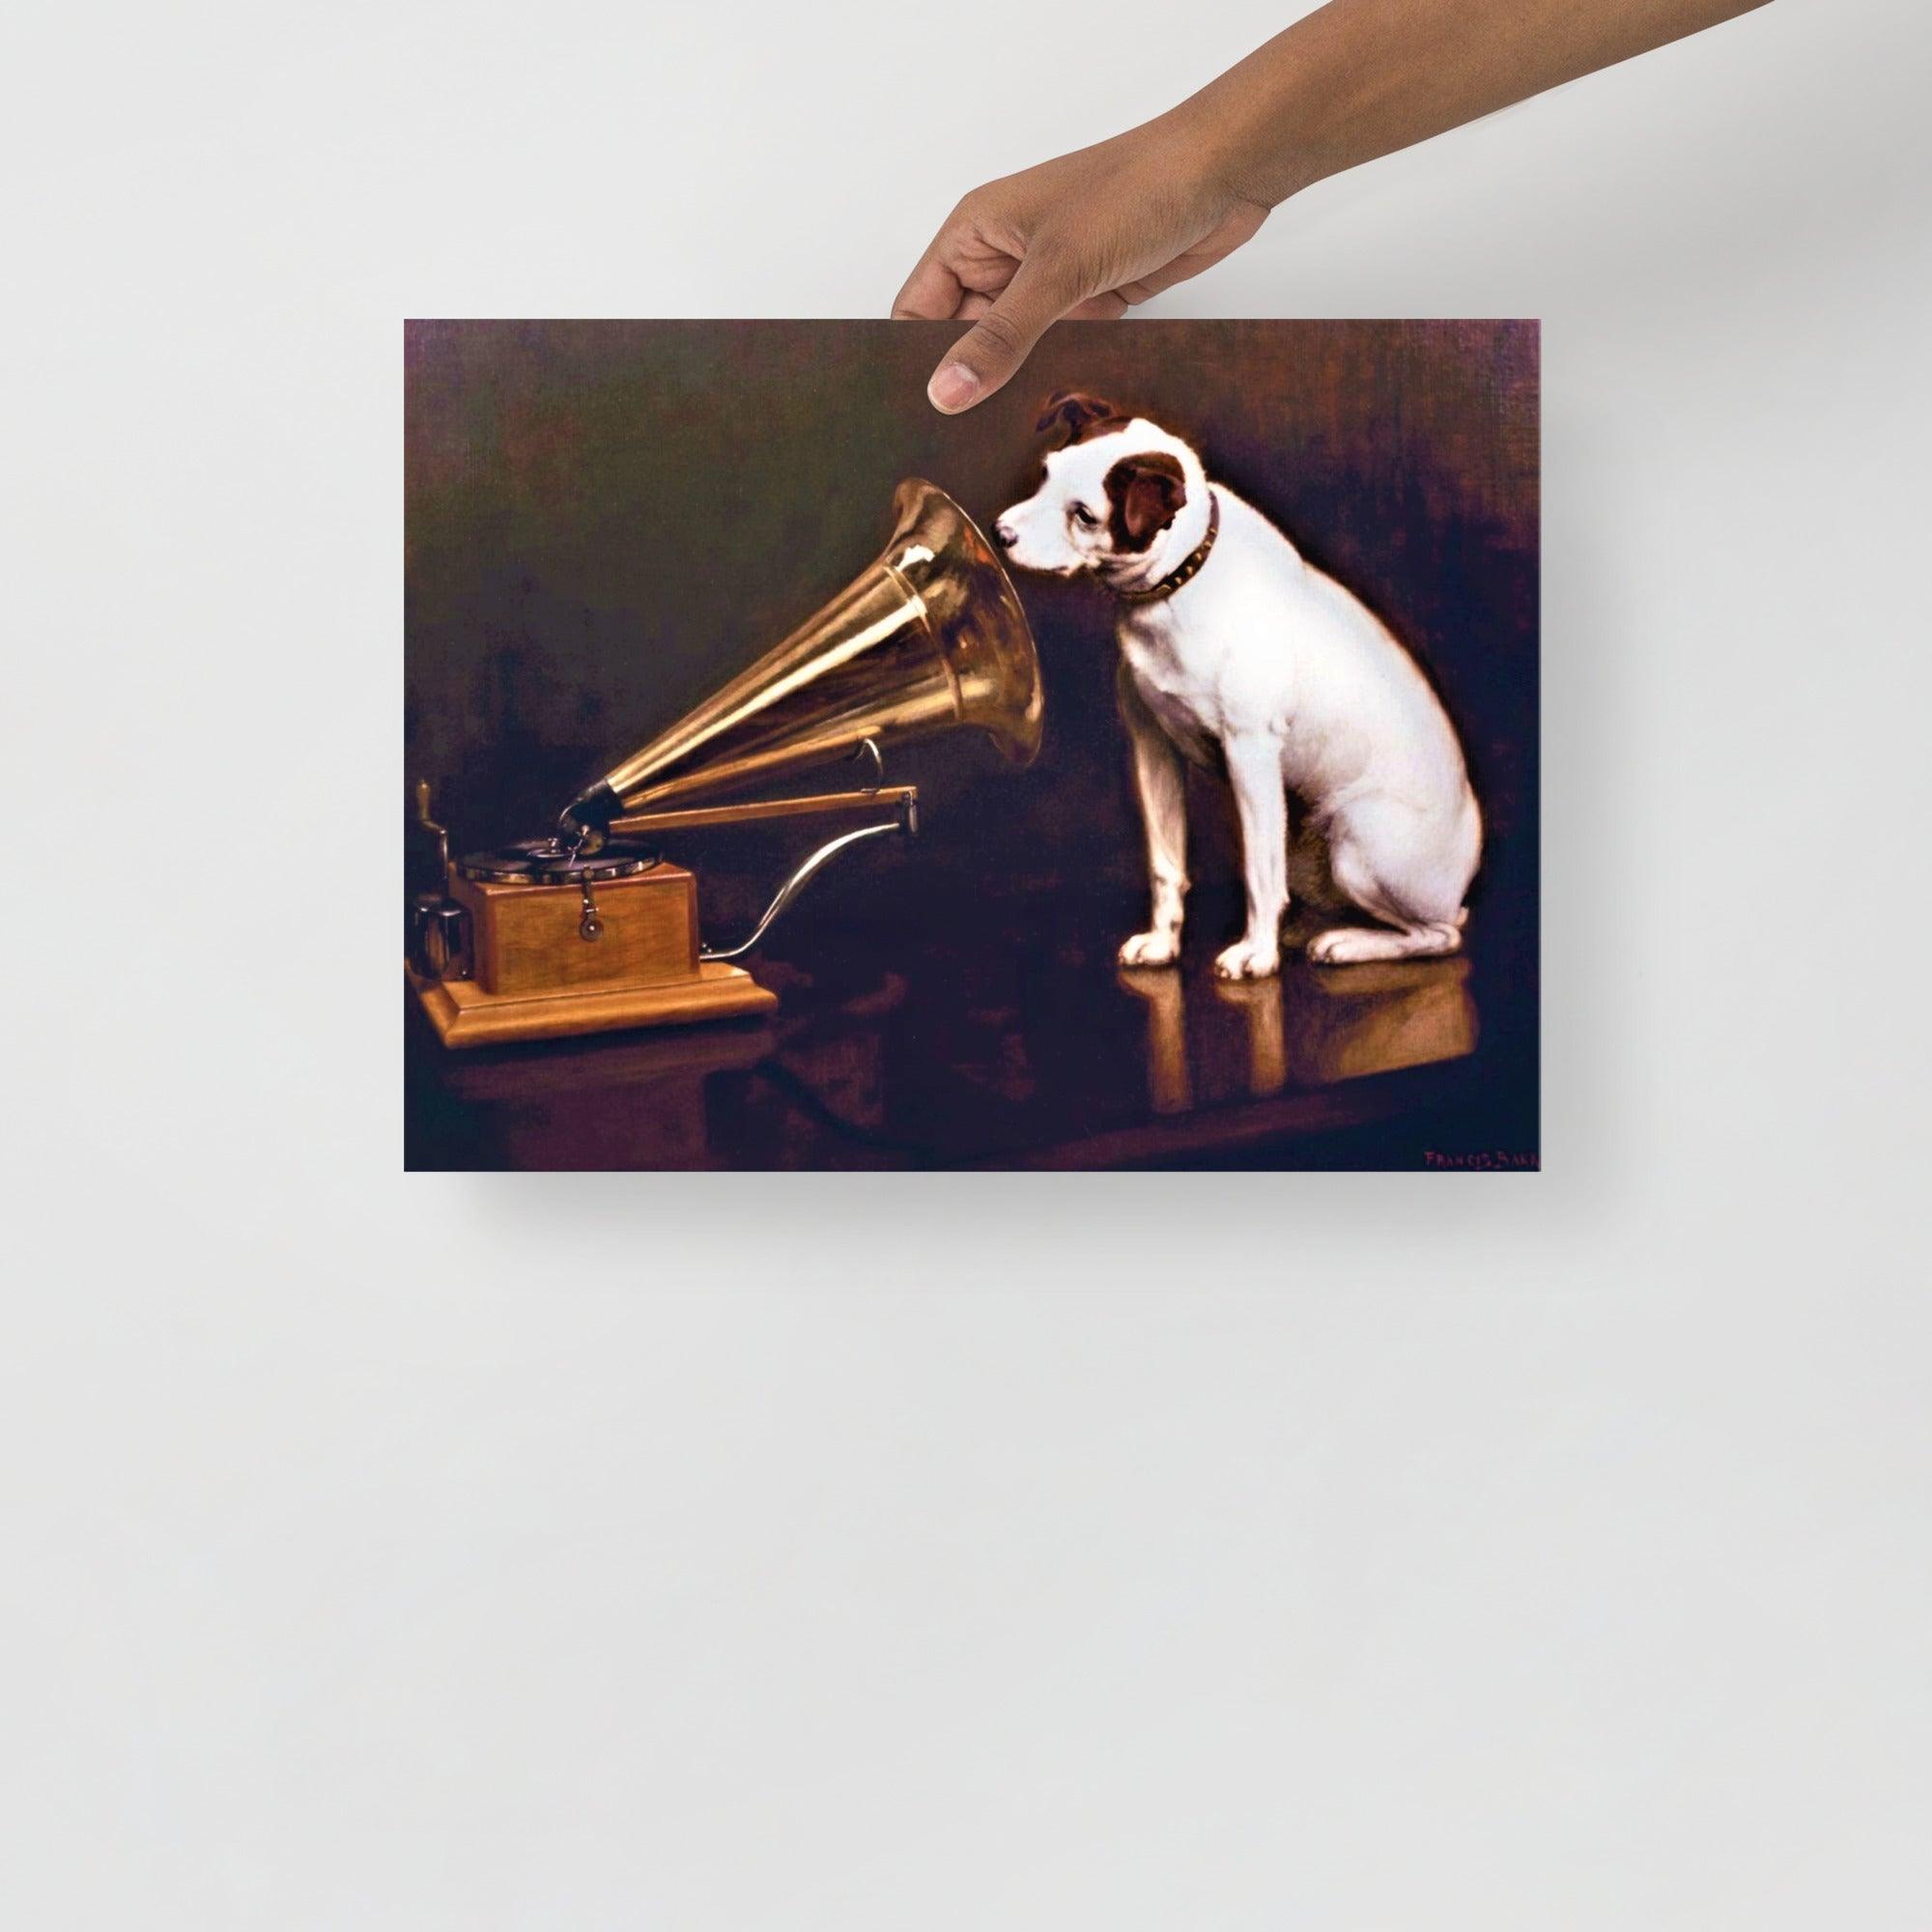 A His Master's Voice By Francis Barraud poster on a plain backdrop in size 12x16”.